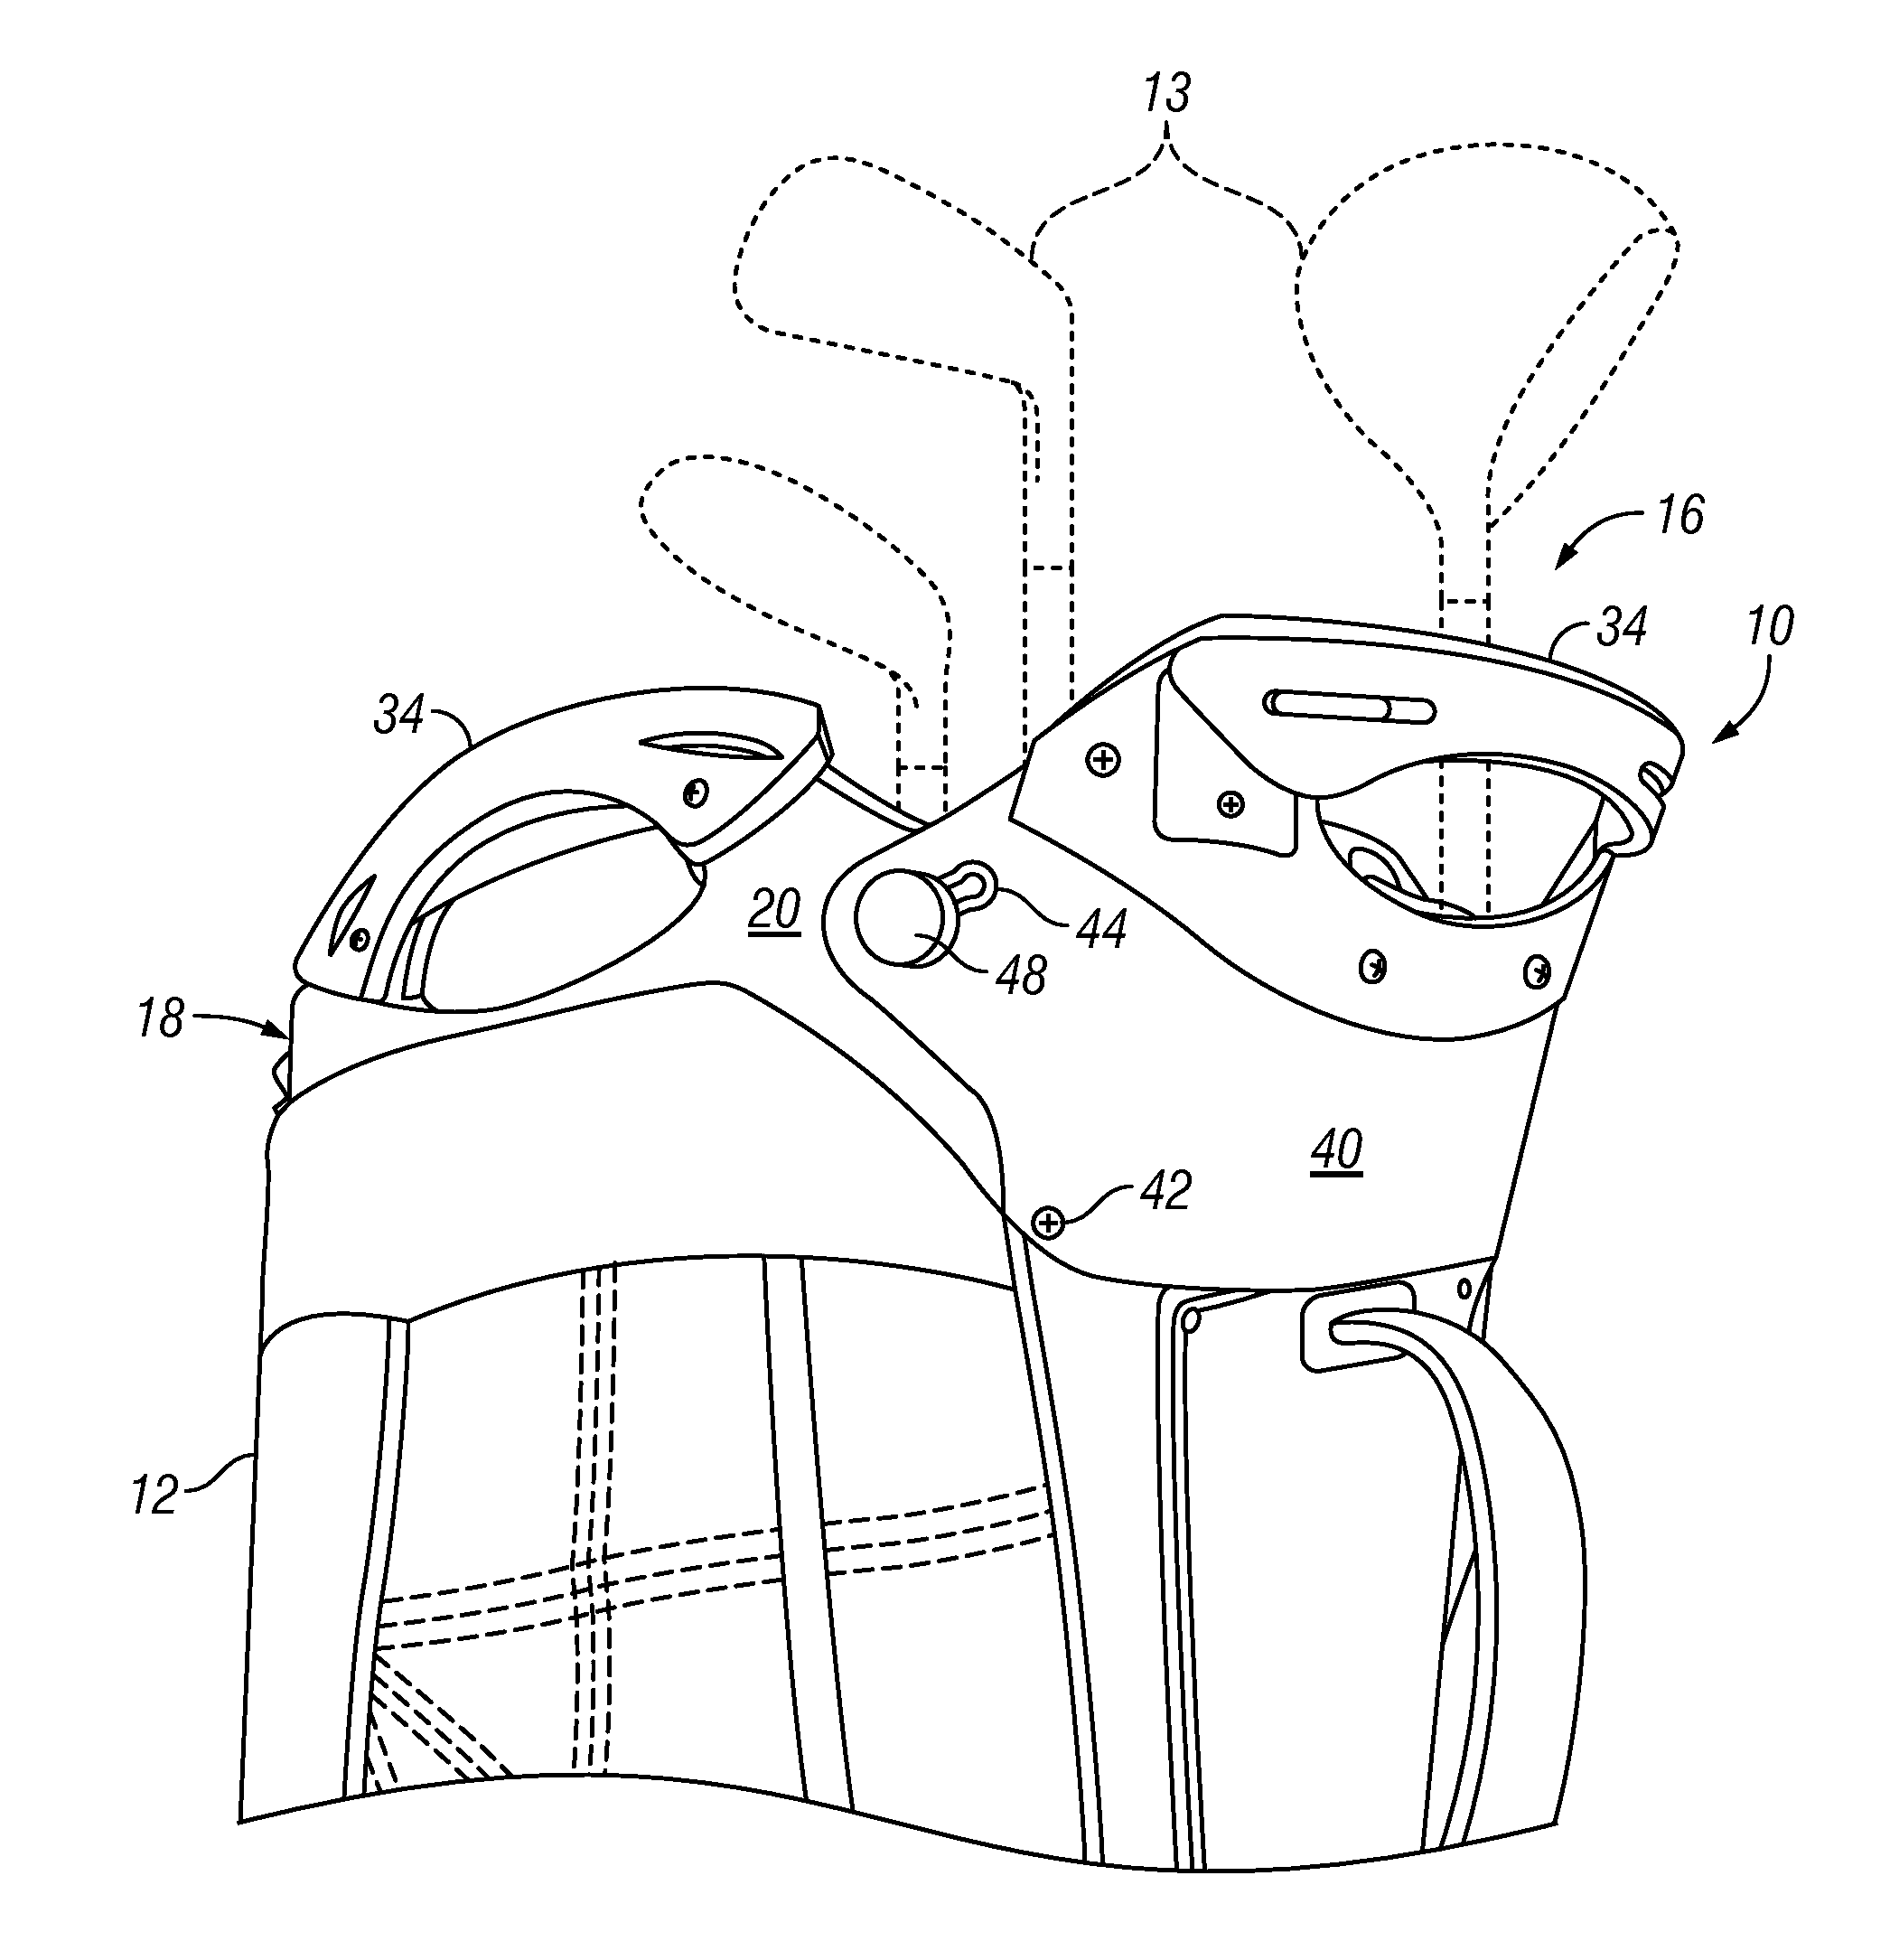 Golf bag with expandable collar apertures